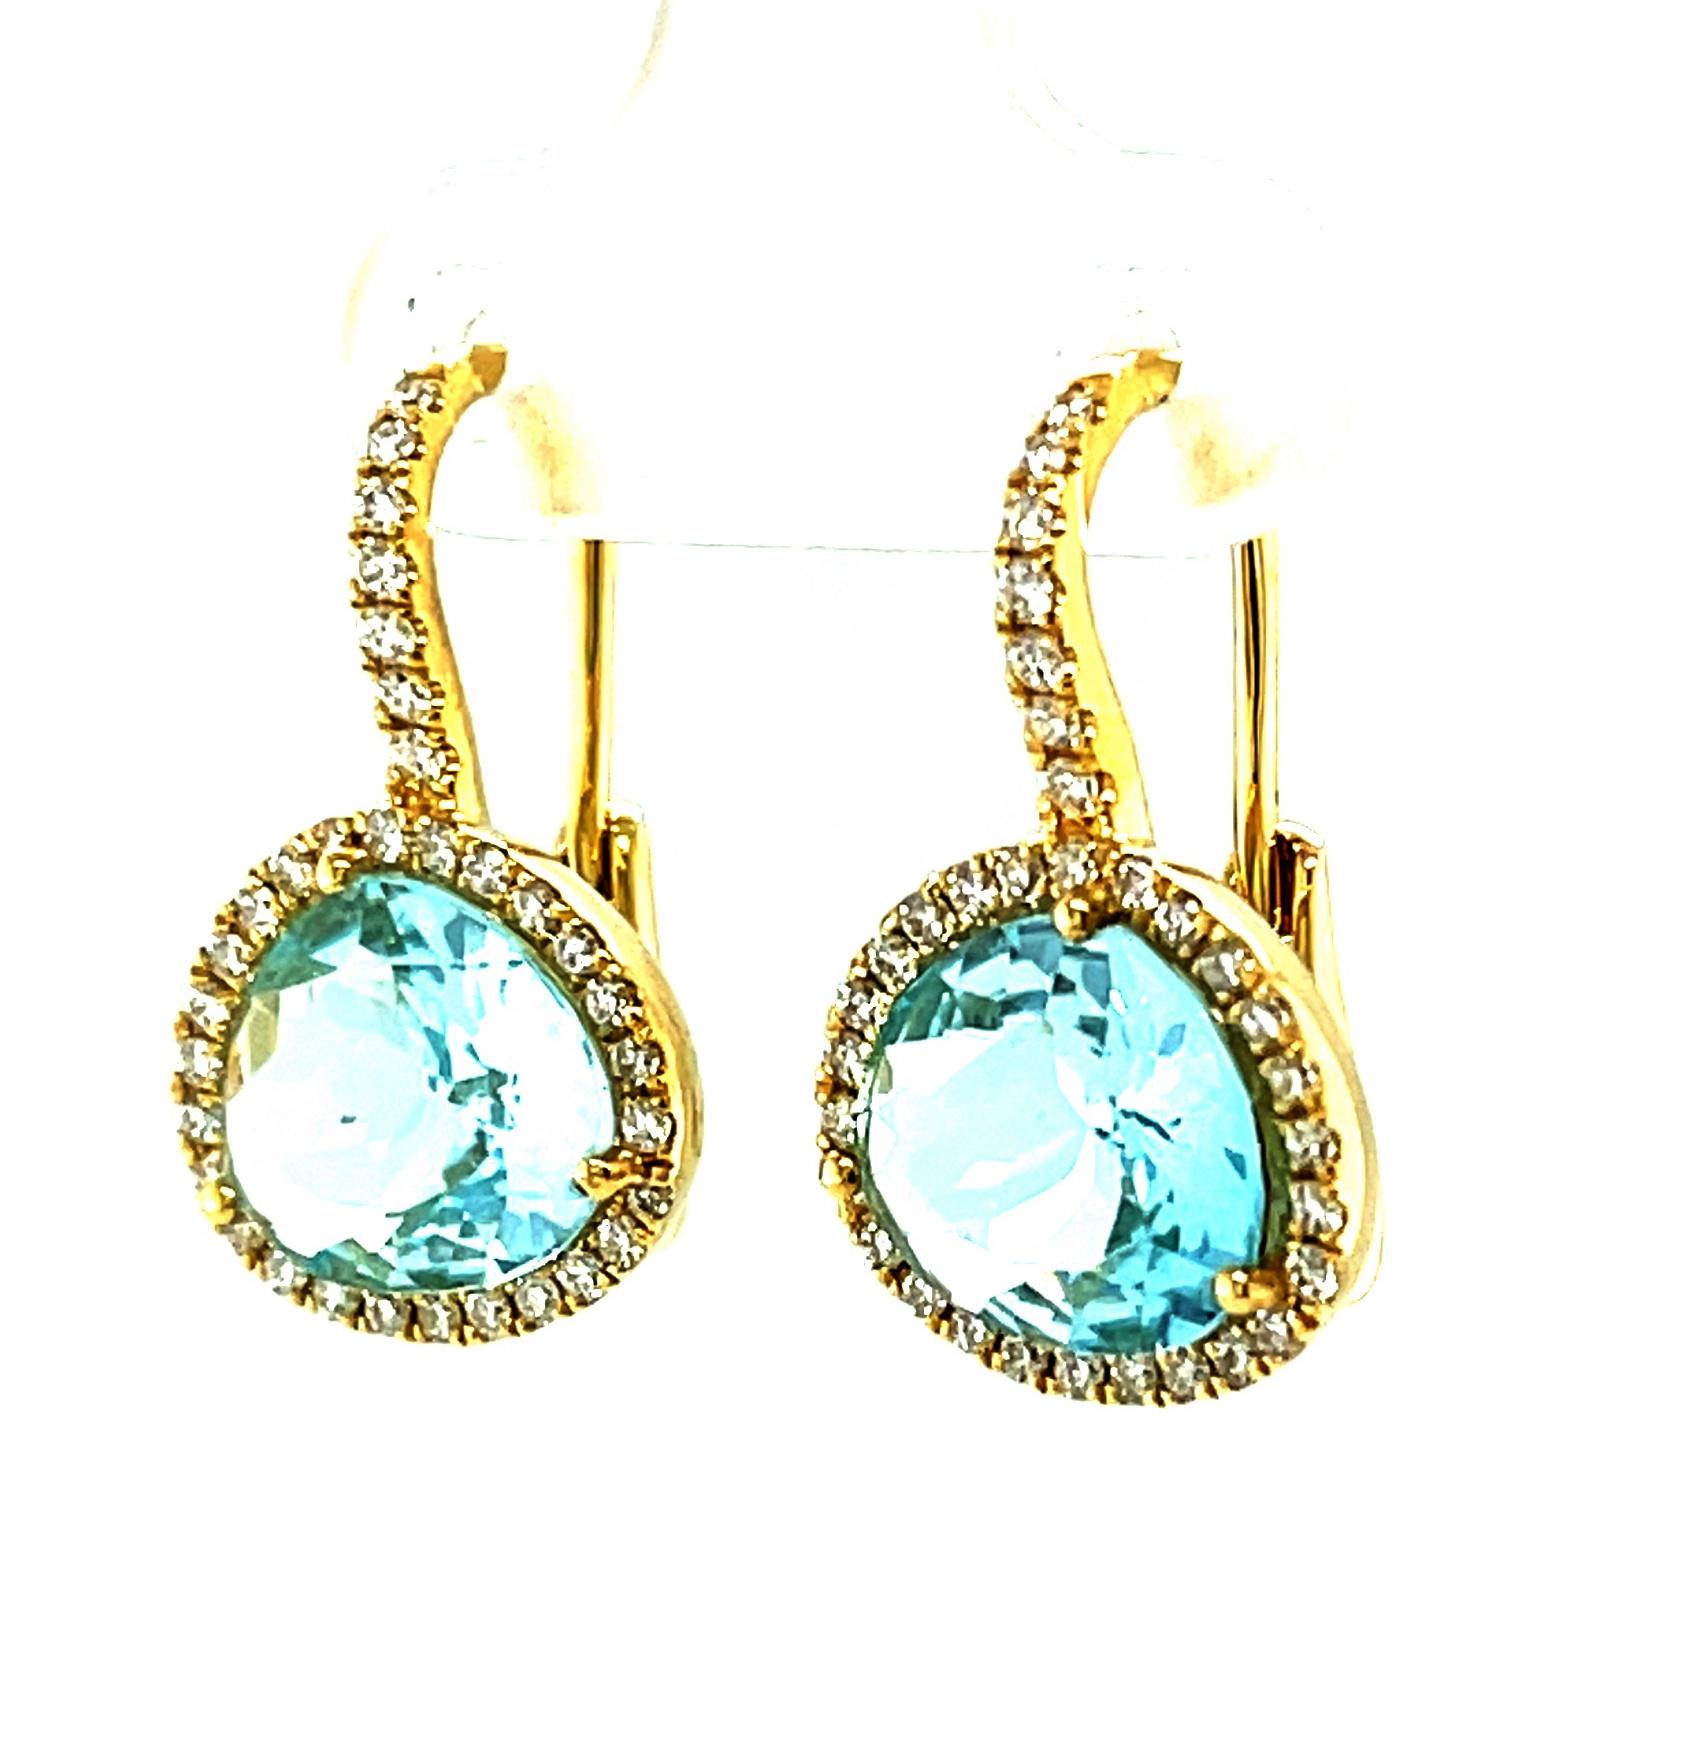 Brilliant Cut Blue Topaz and Diamond Halo Drop Earrings in Yellow Gold, 5.49 Carats Total For Sale